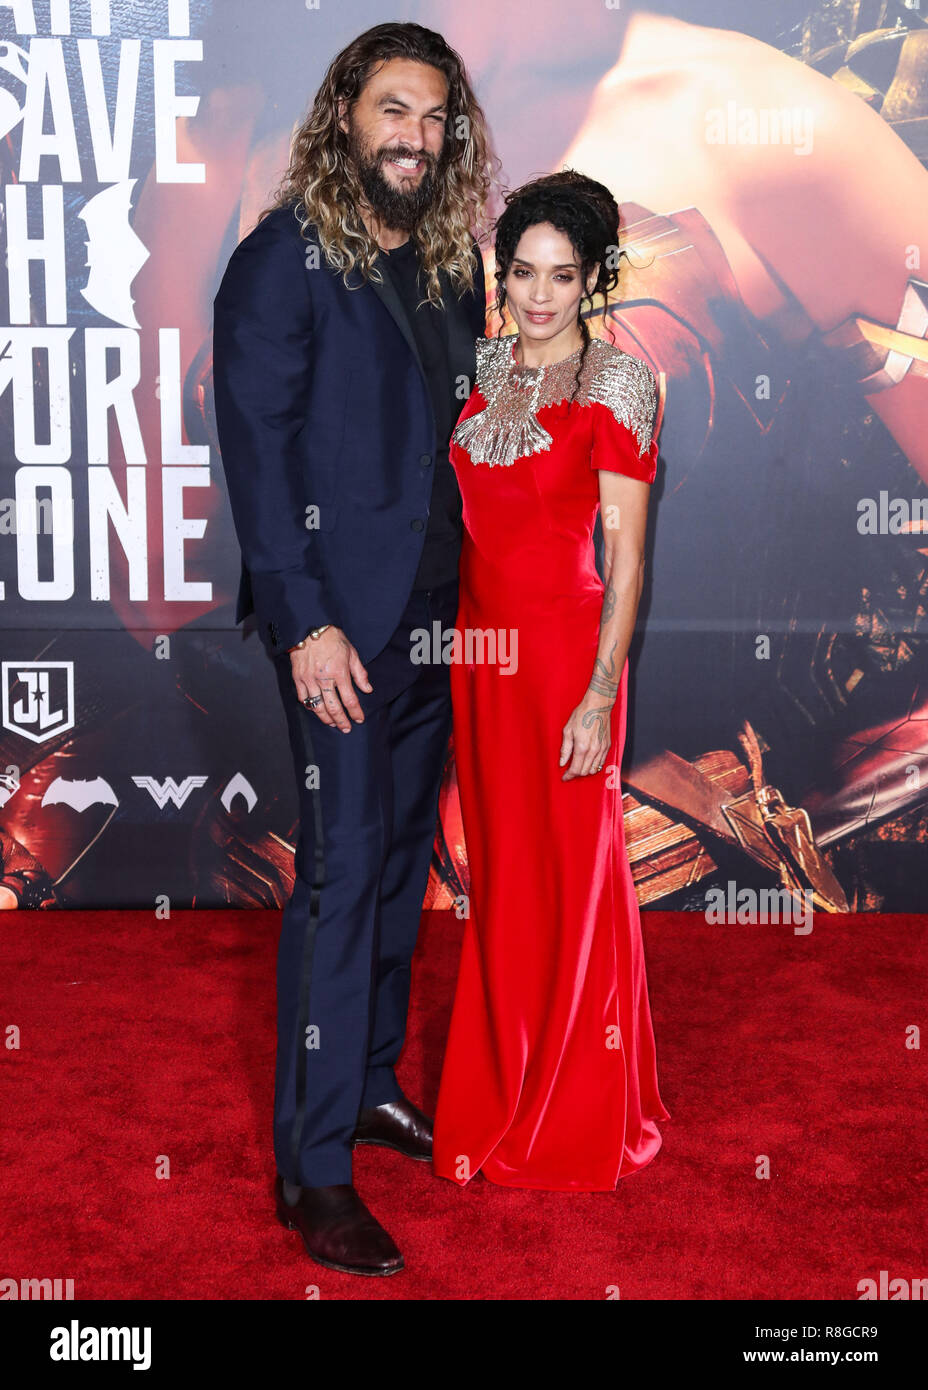 HOLLYWOOD, LOS ANGELES, CA, USA - NOVEMBER 13: Actor Jason Momoa and wife Lisa Bonet arrive at the World Premiere Of Warner Bros. Pictures' 'Justice League' held at the Dolby Theatre on November 13, 2017 in Hollywood, Los Angeles, California, United States. (Photo by Xavier Collin/Image Press Agency) Stock Photo